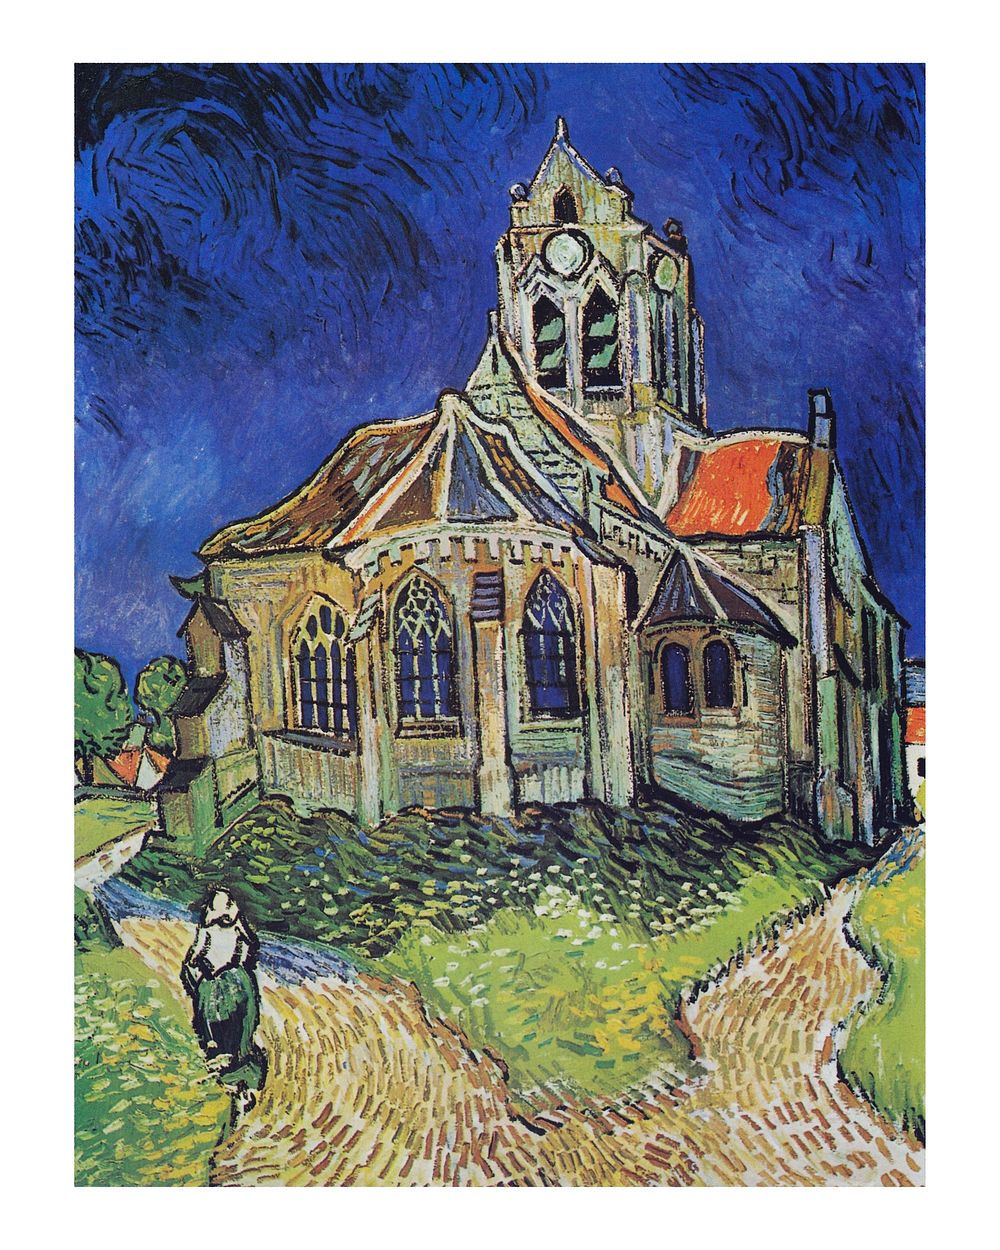 Van Gogh art print, famous painting The Church at Auvers wall decor.